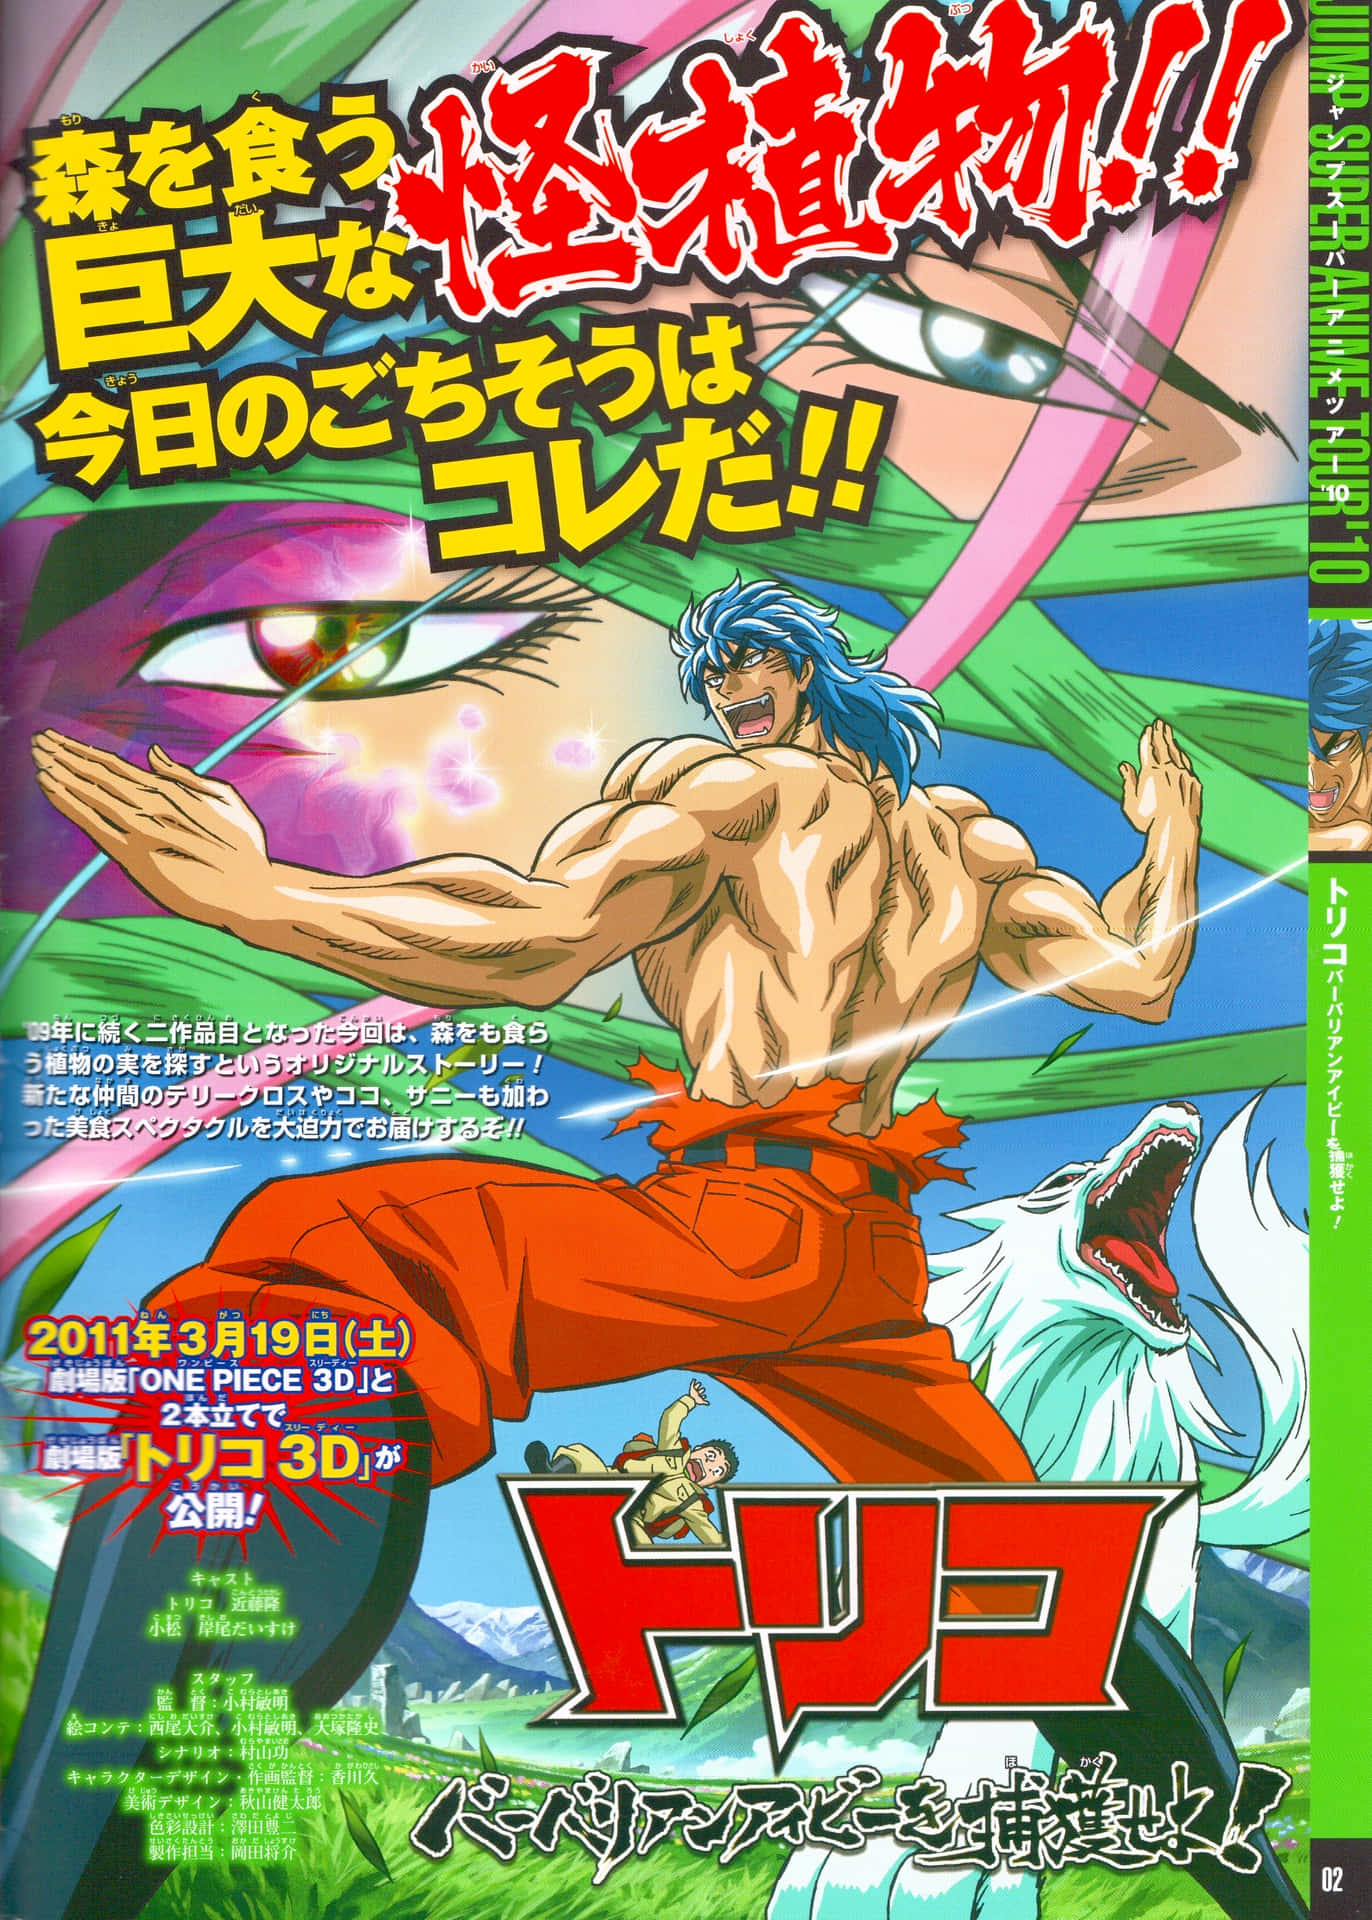 Experience an Adventure with Toriko! Wallpaper